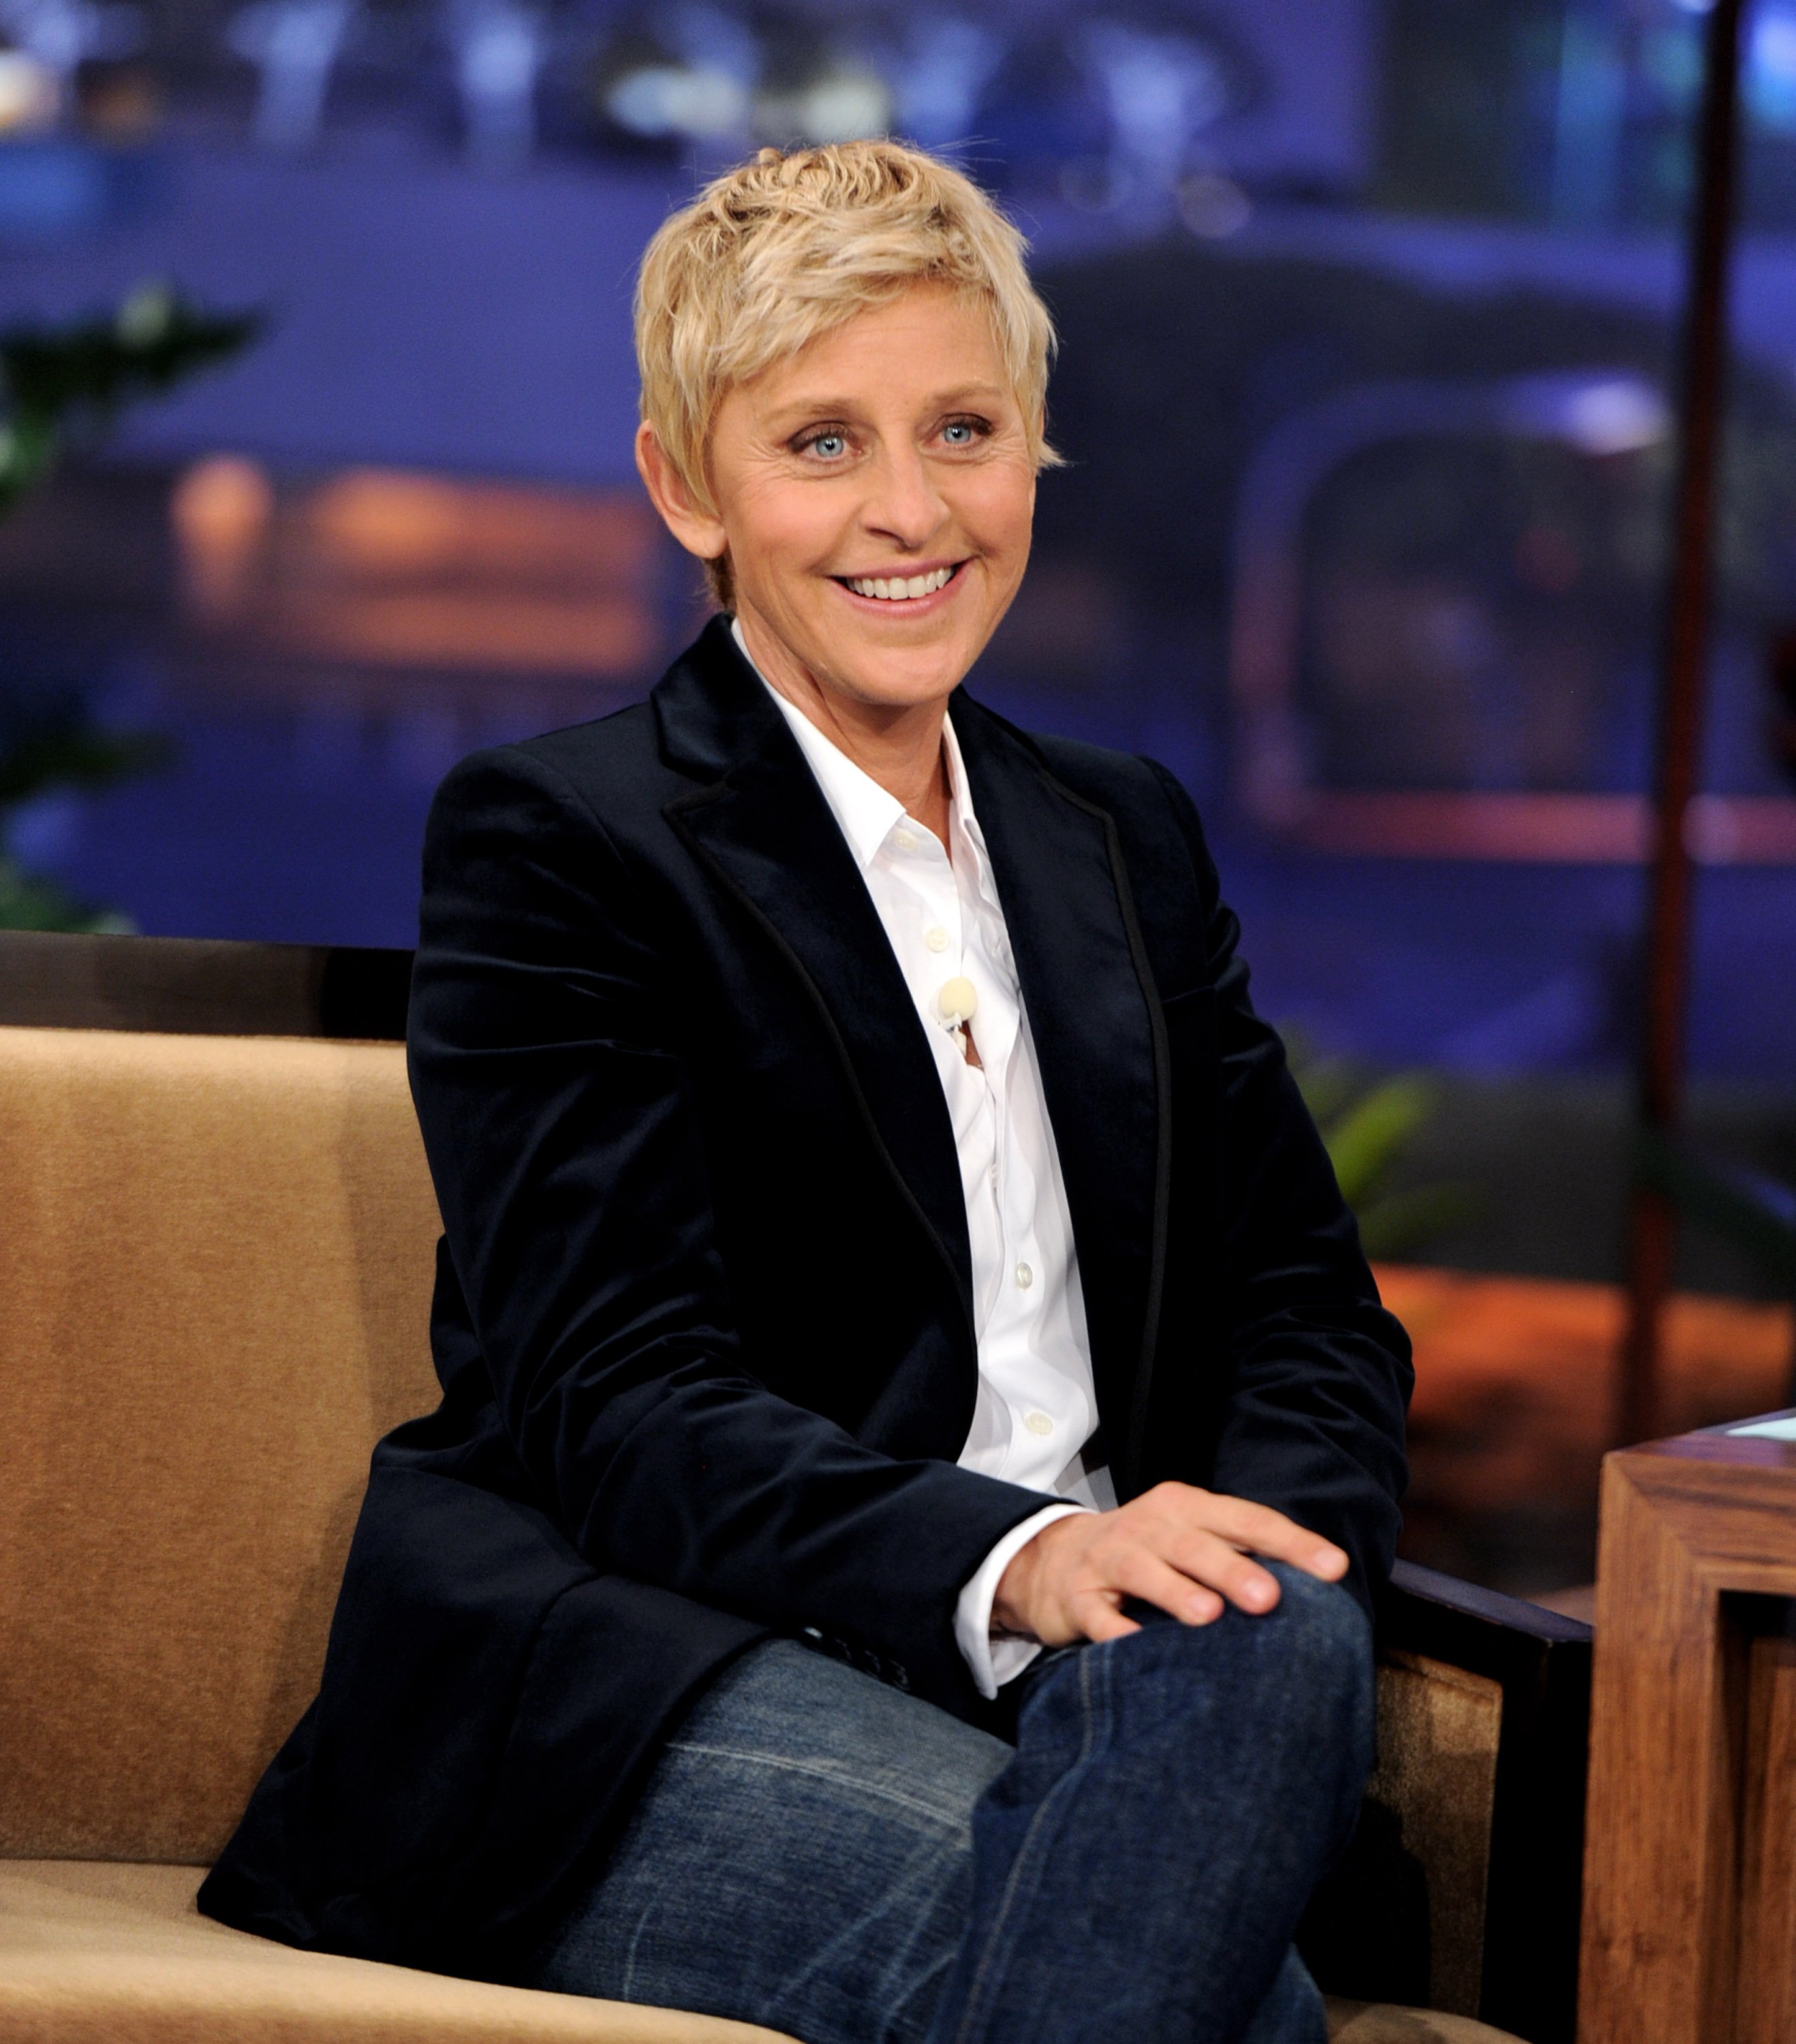 Ellen DeGeneres on “The Tonight Show” on September 13, 2011 in California. | Source: Getty Images